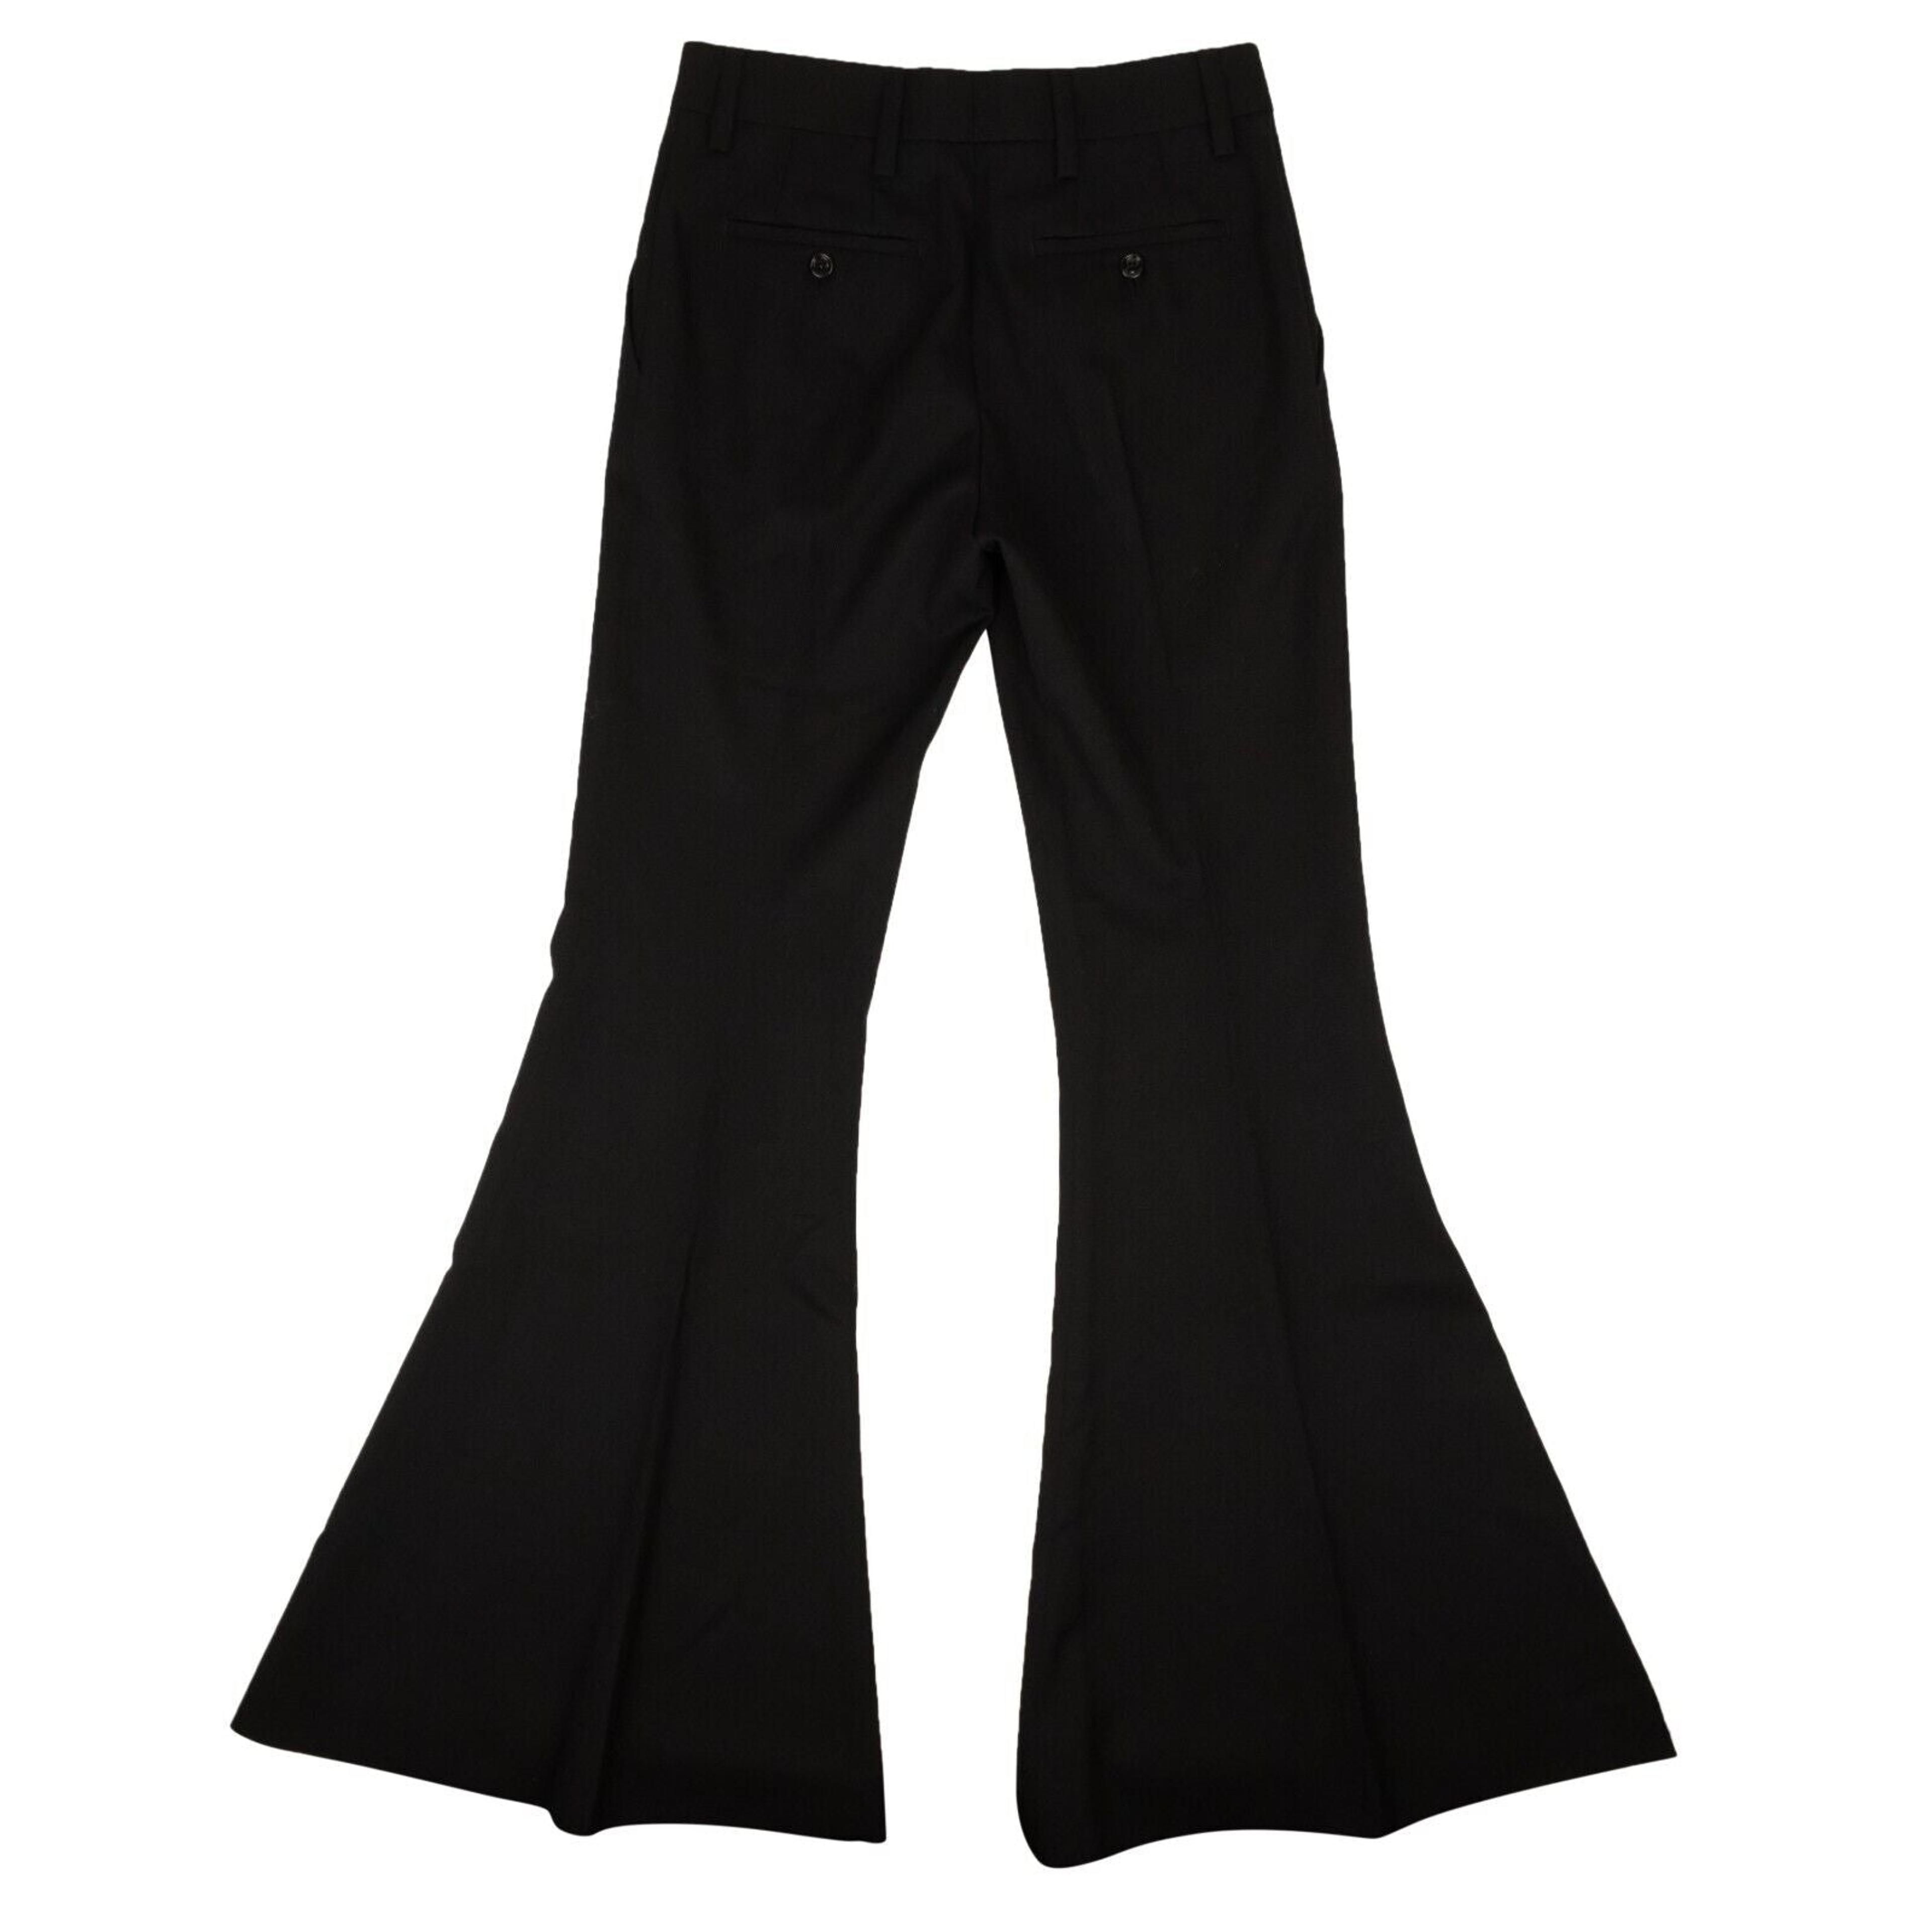 Alternate View 2 of Black Cotton Bell Buttom Casual Pants